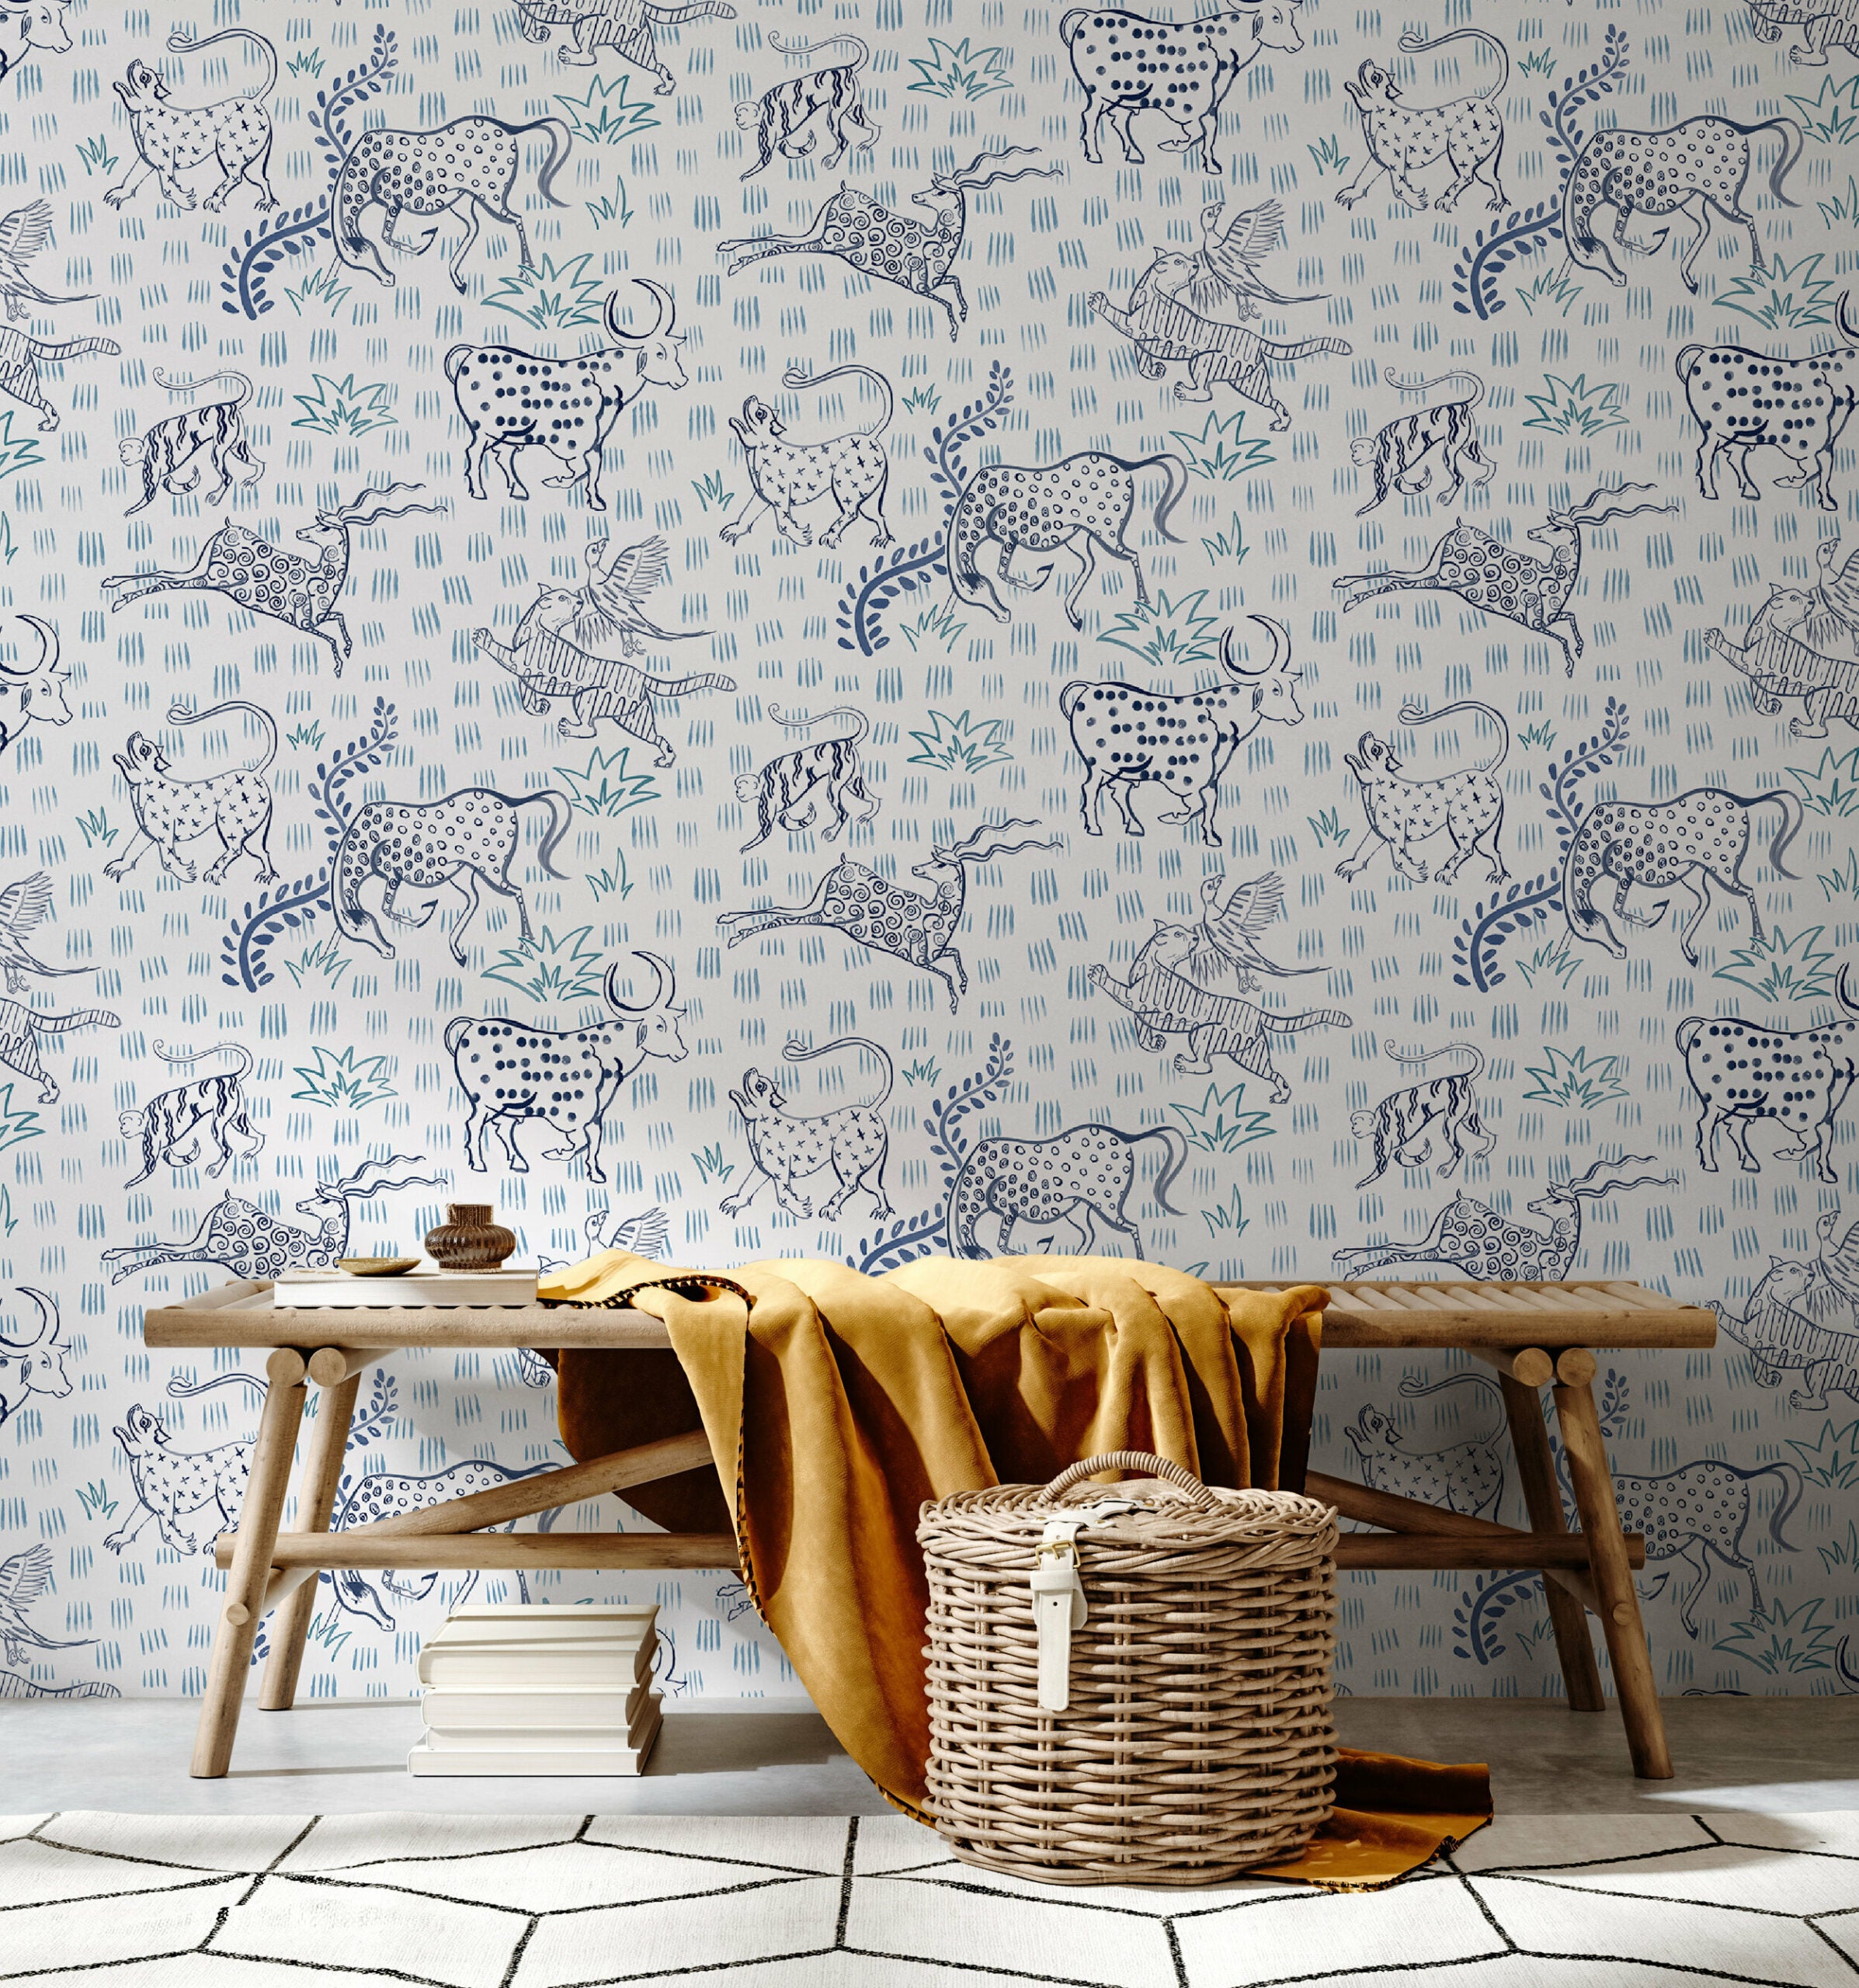 A bench and basket stand in front of a wall papered in a playful hand-drawn animal print in shades of blue on a white field.